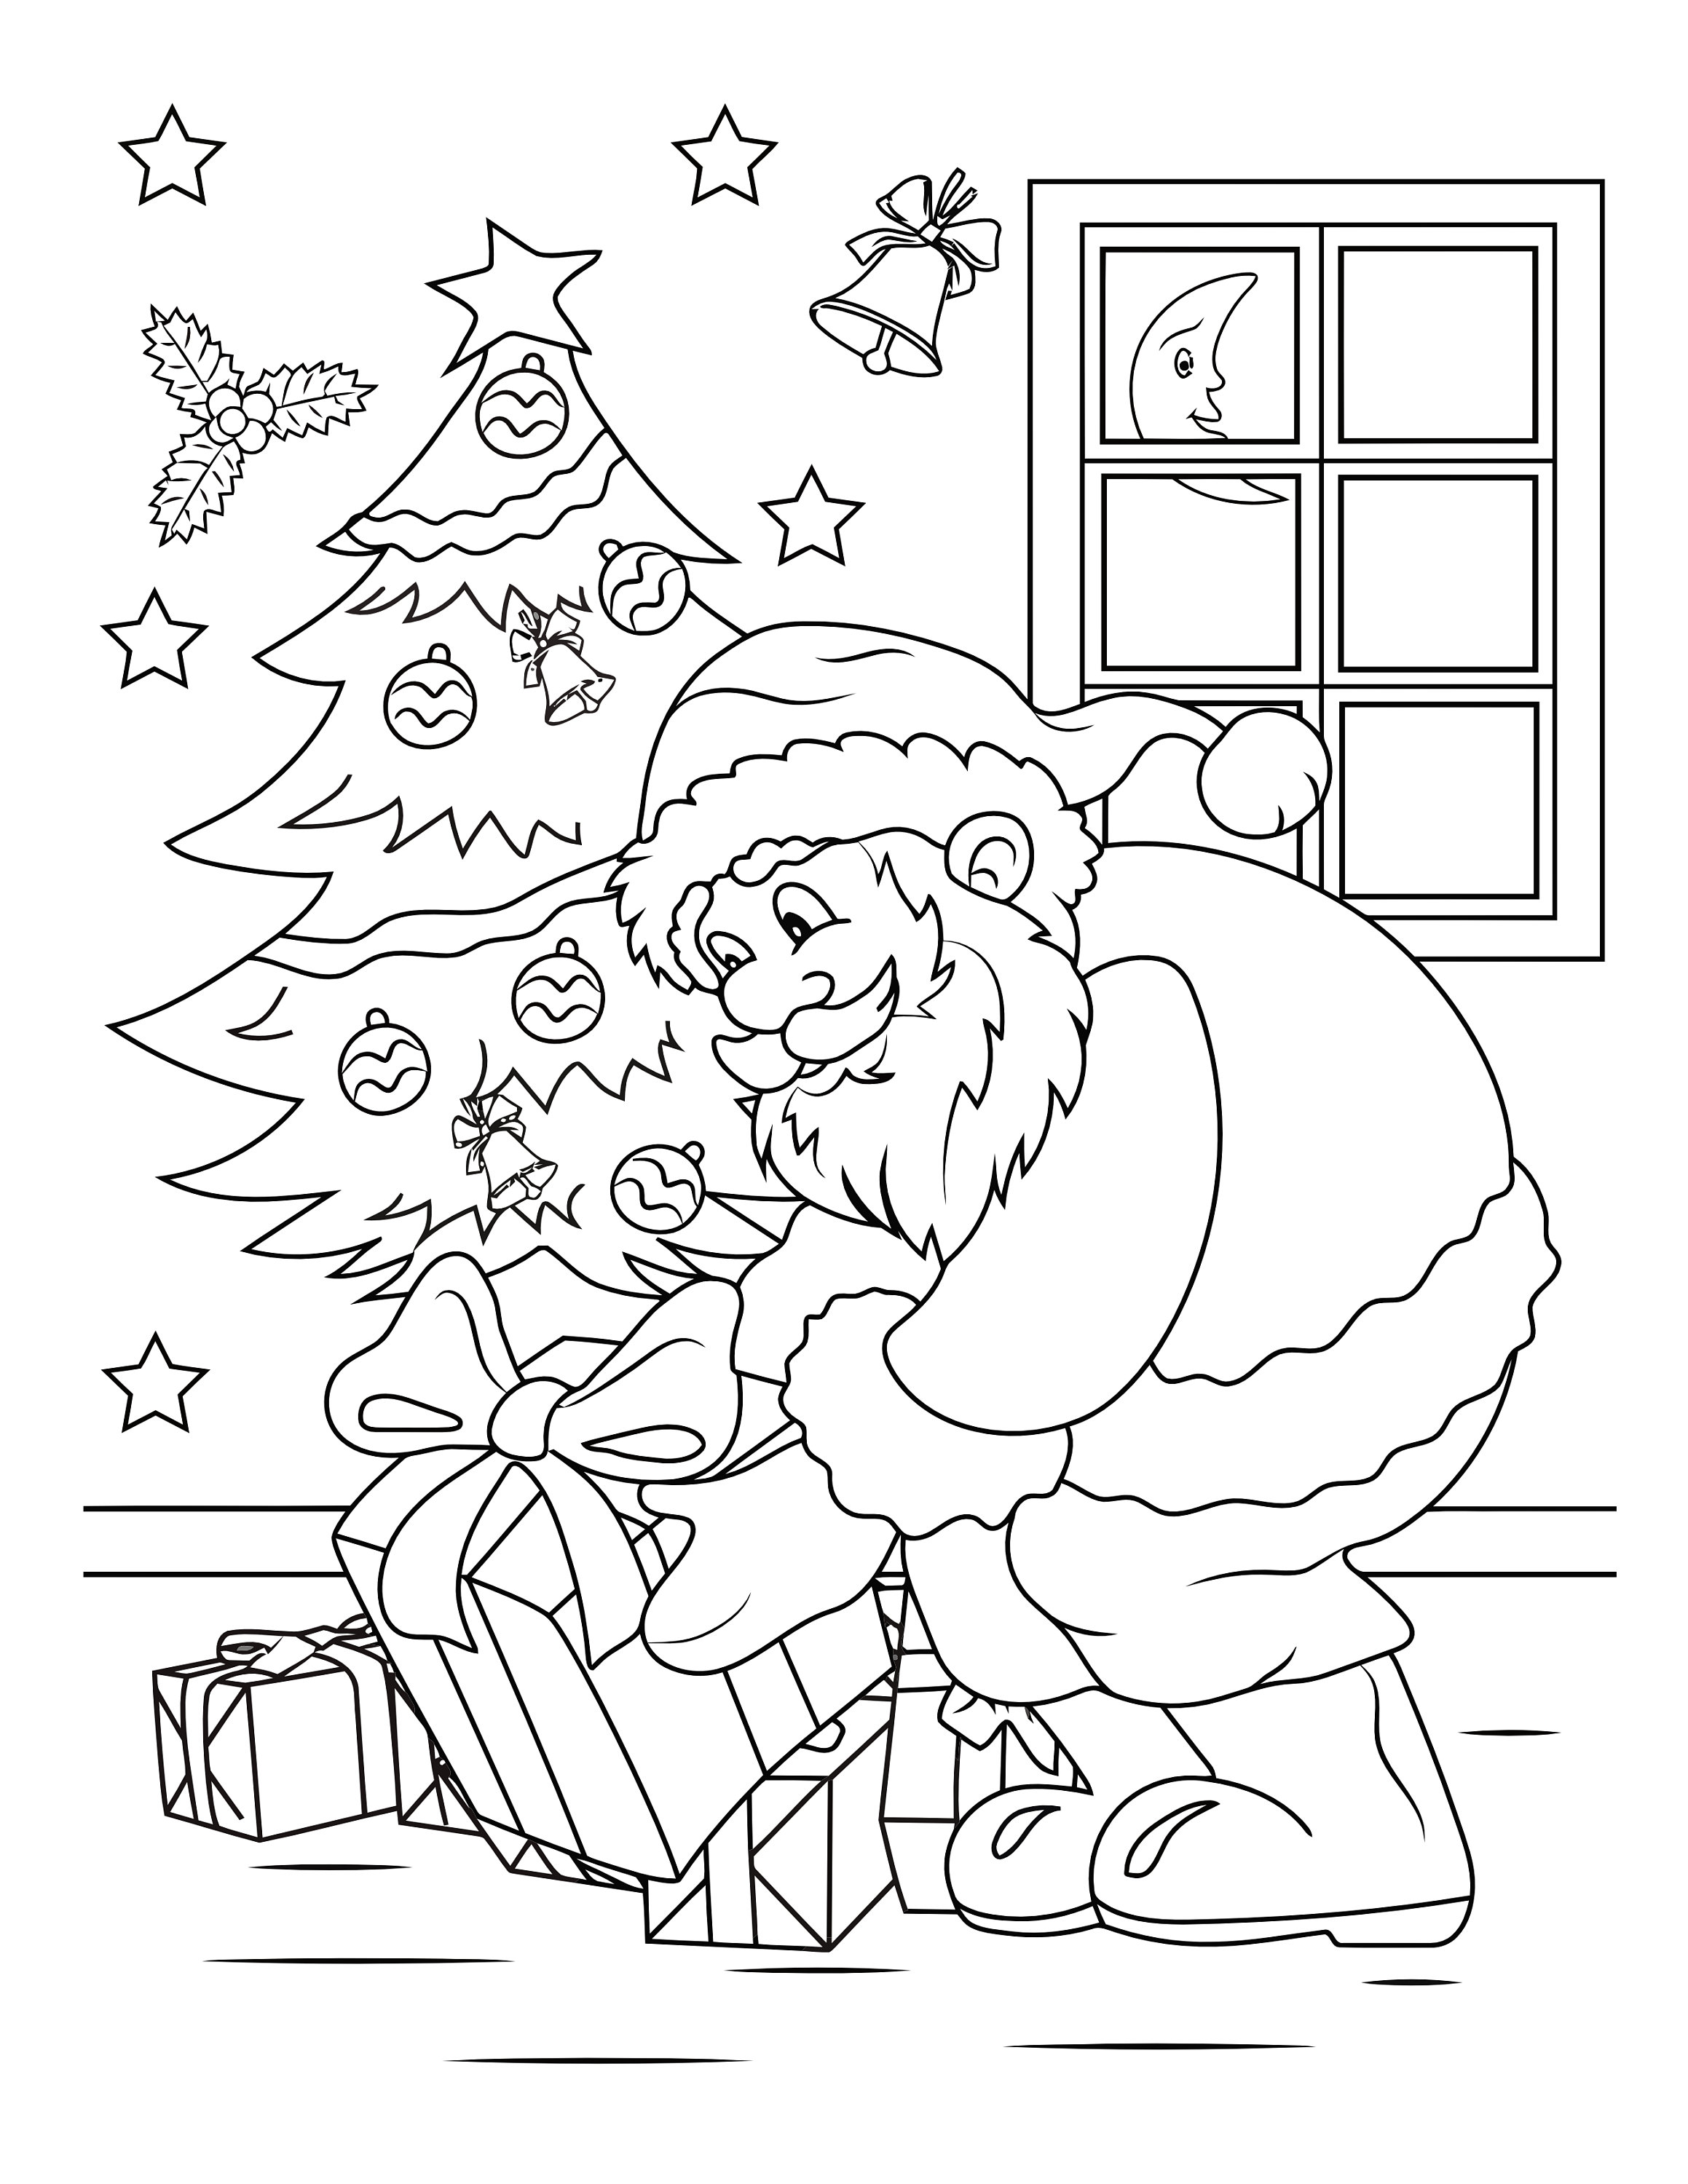 Printable Christmas Coloring Pages for ...